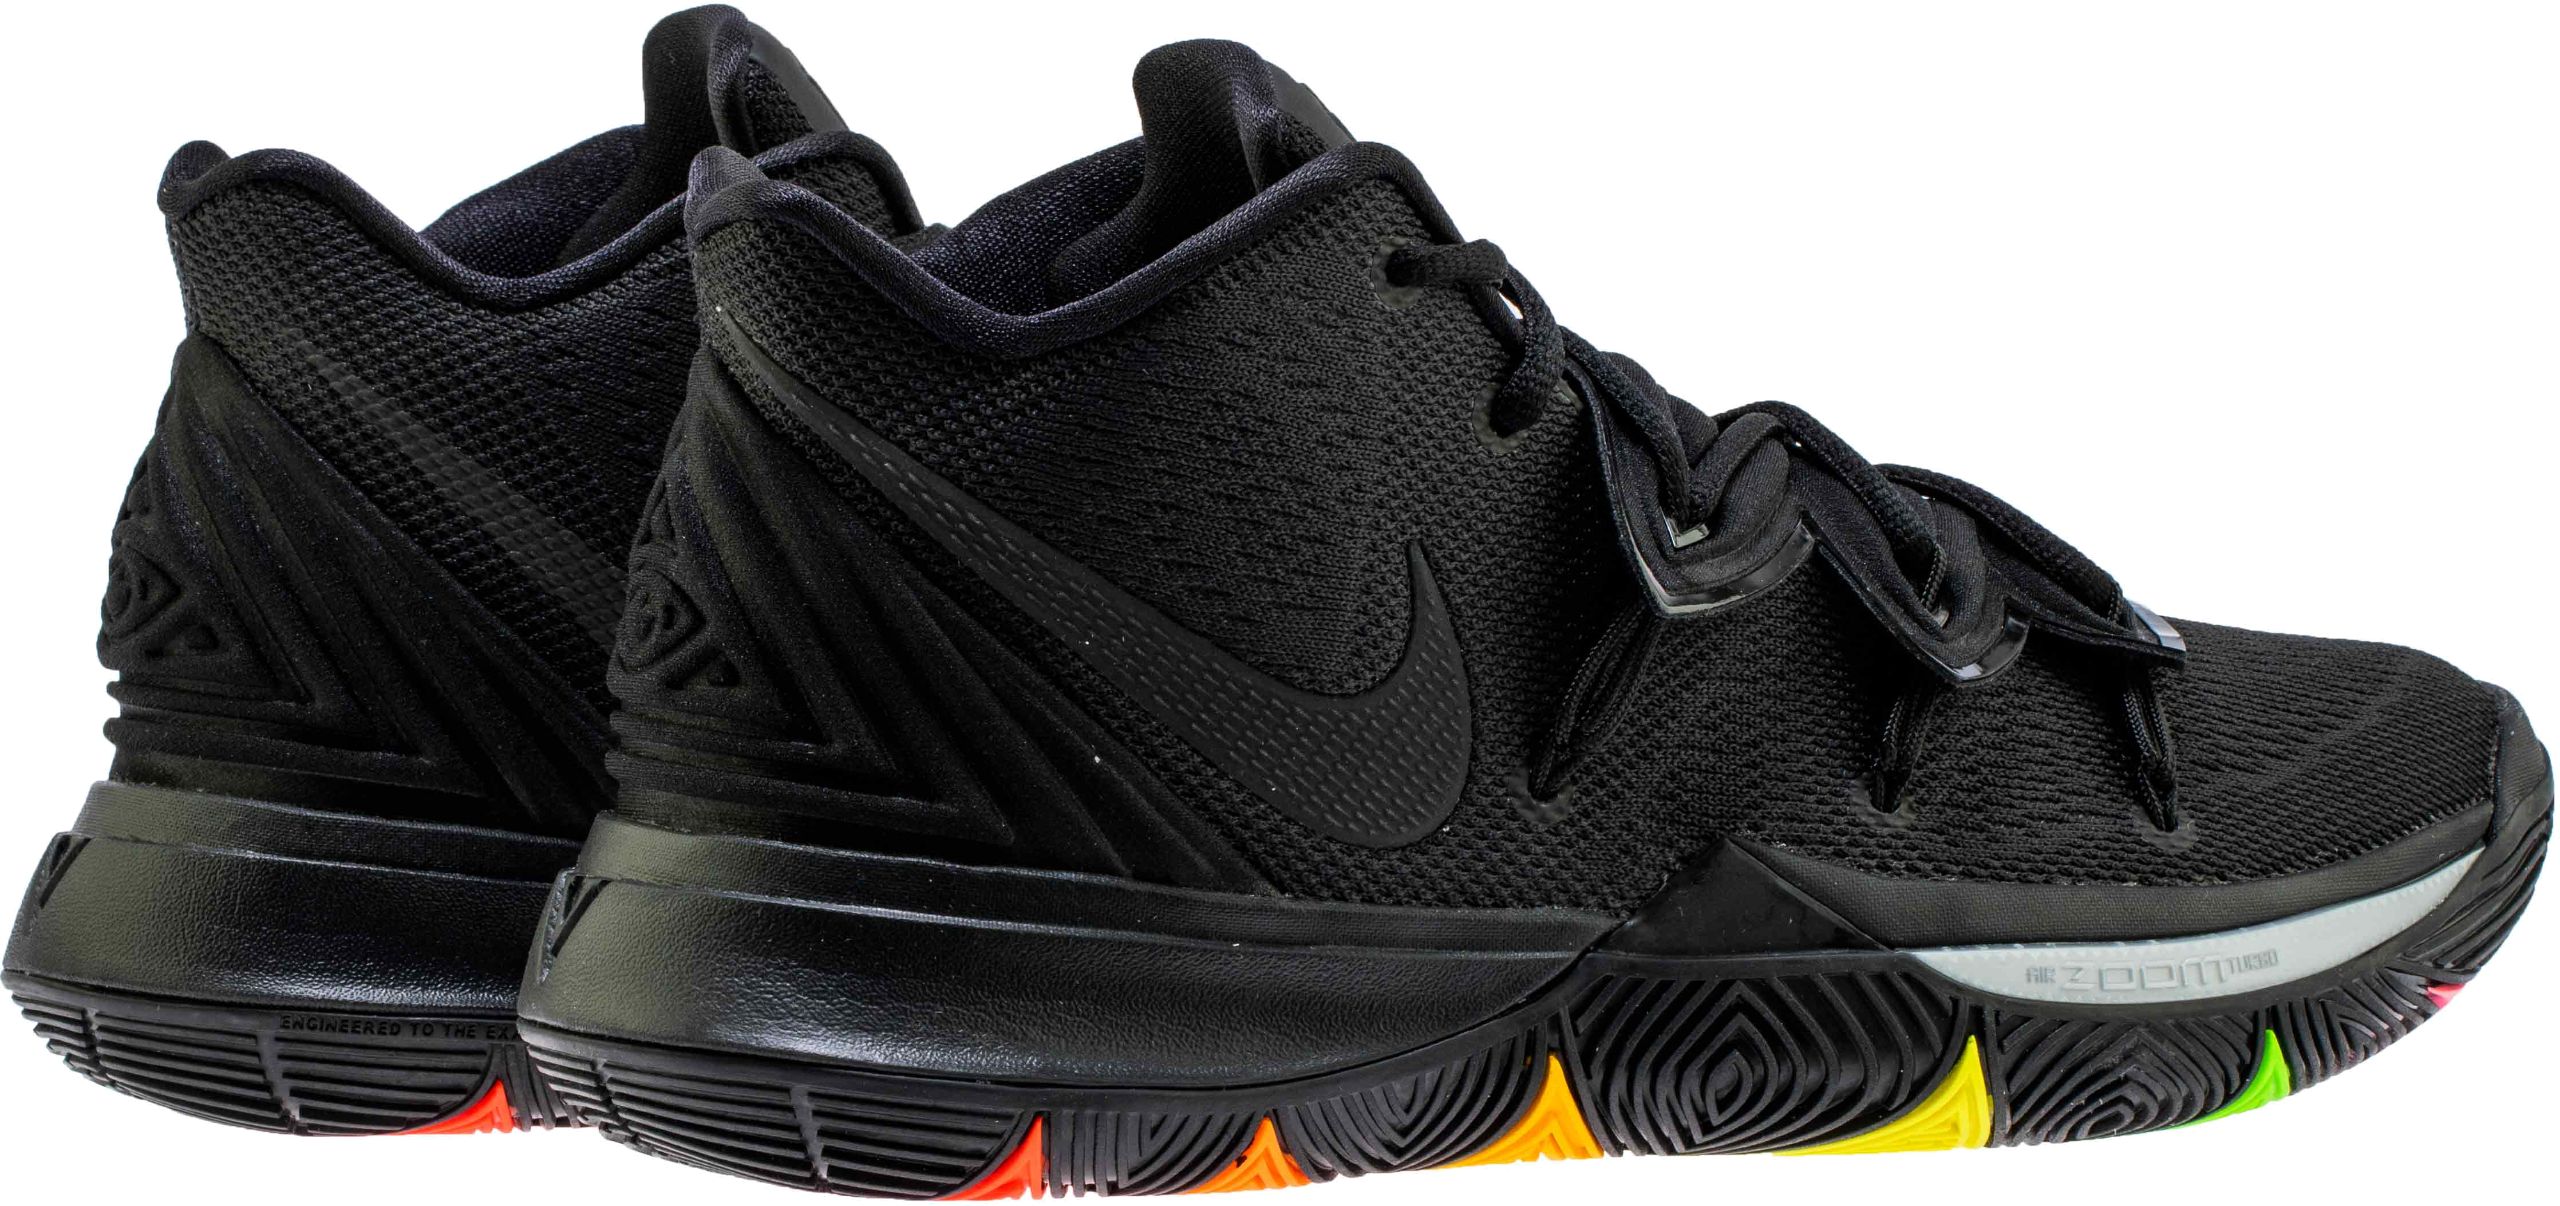 kyrie 5 latest shoes